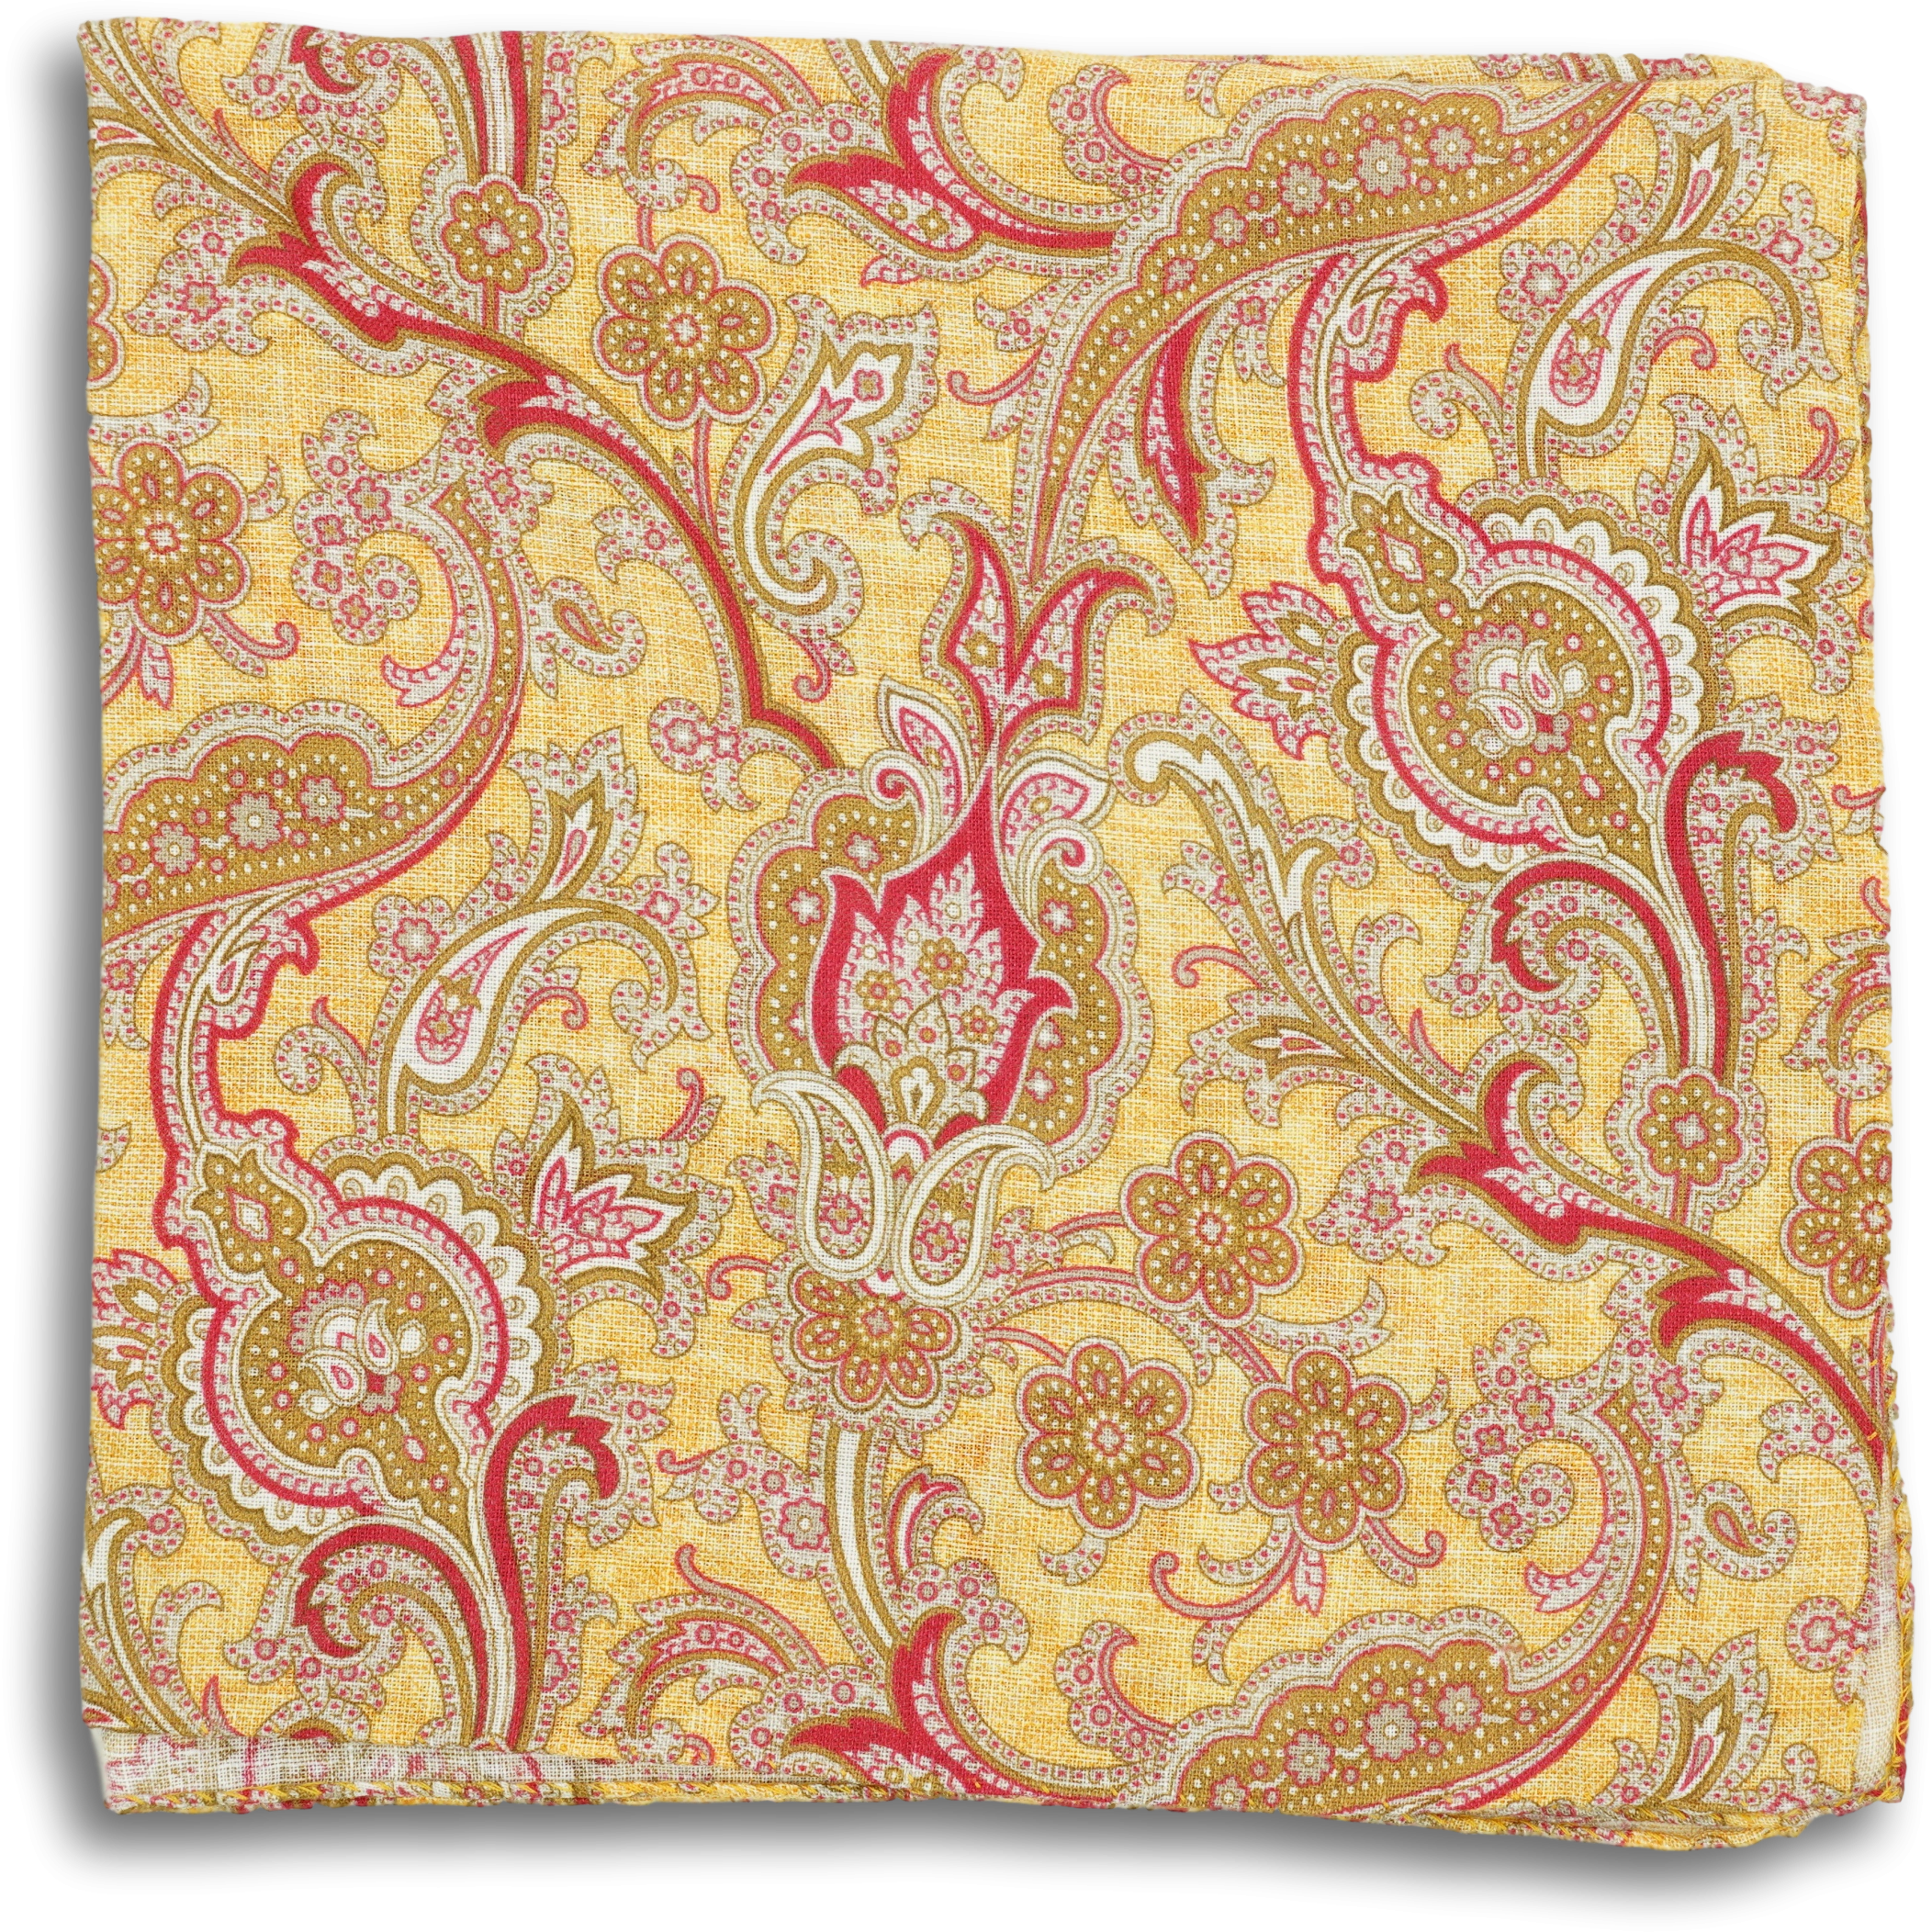 Multicolored Paisley Patterned Linen Pocket Square